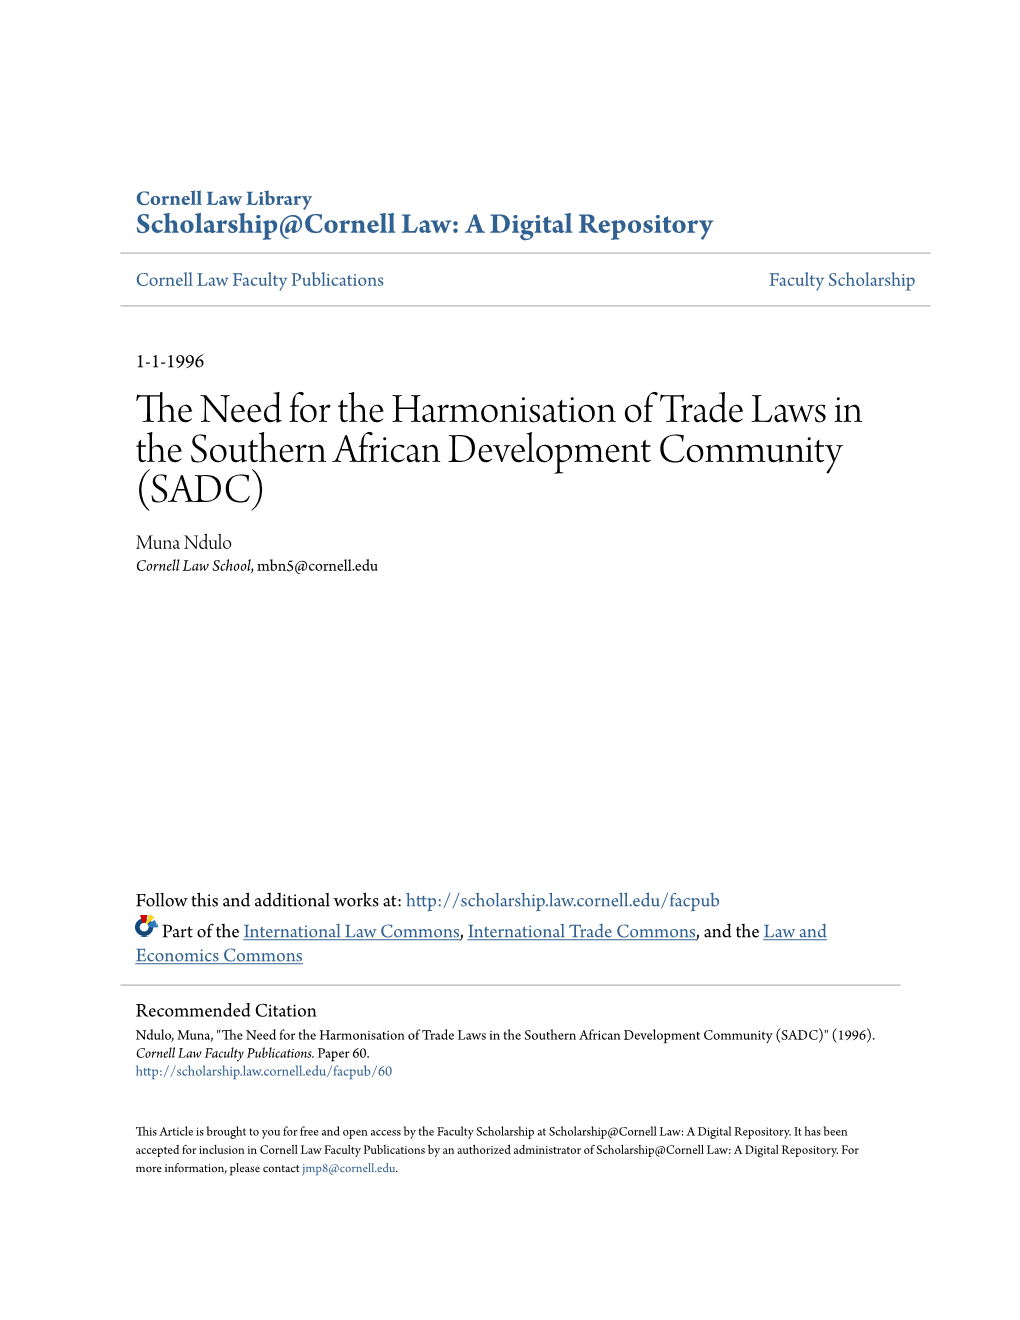 The Need for the Harmonisation of Trade Laws in the Southern African Development Community (Sadc)